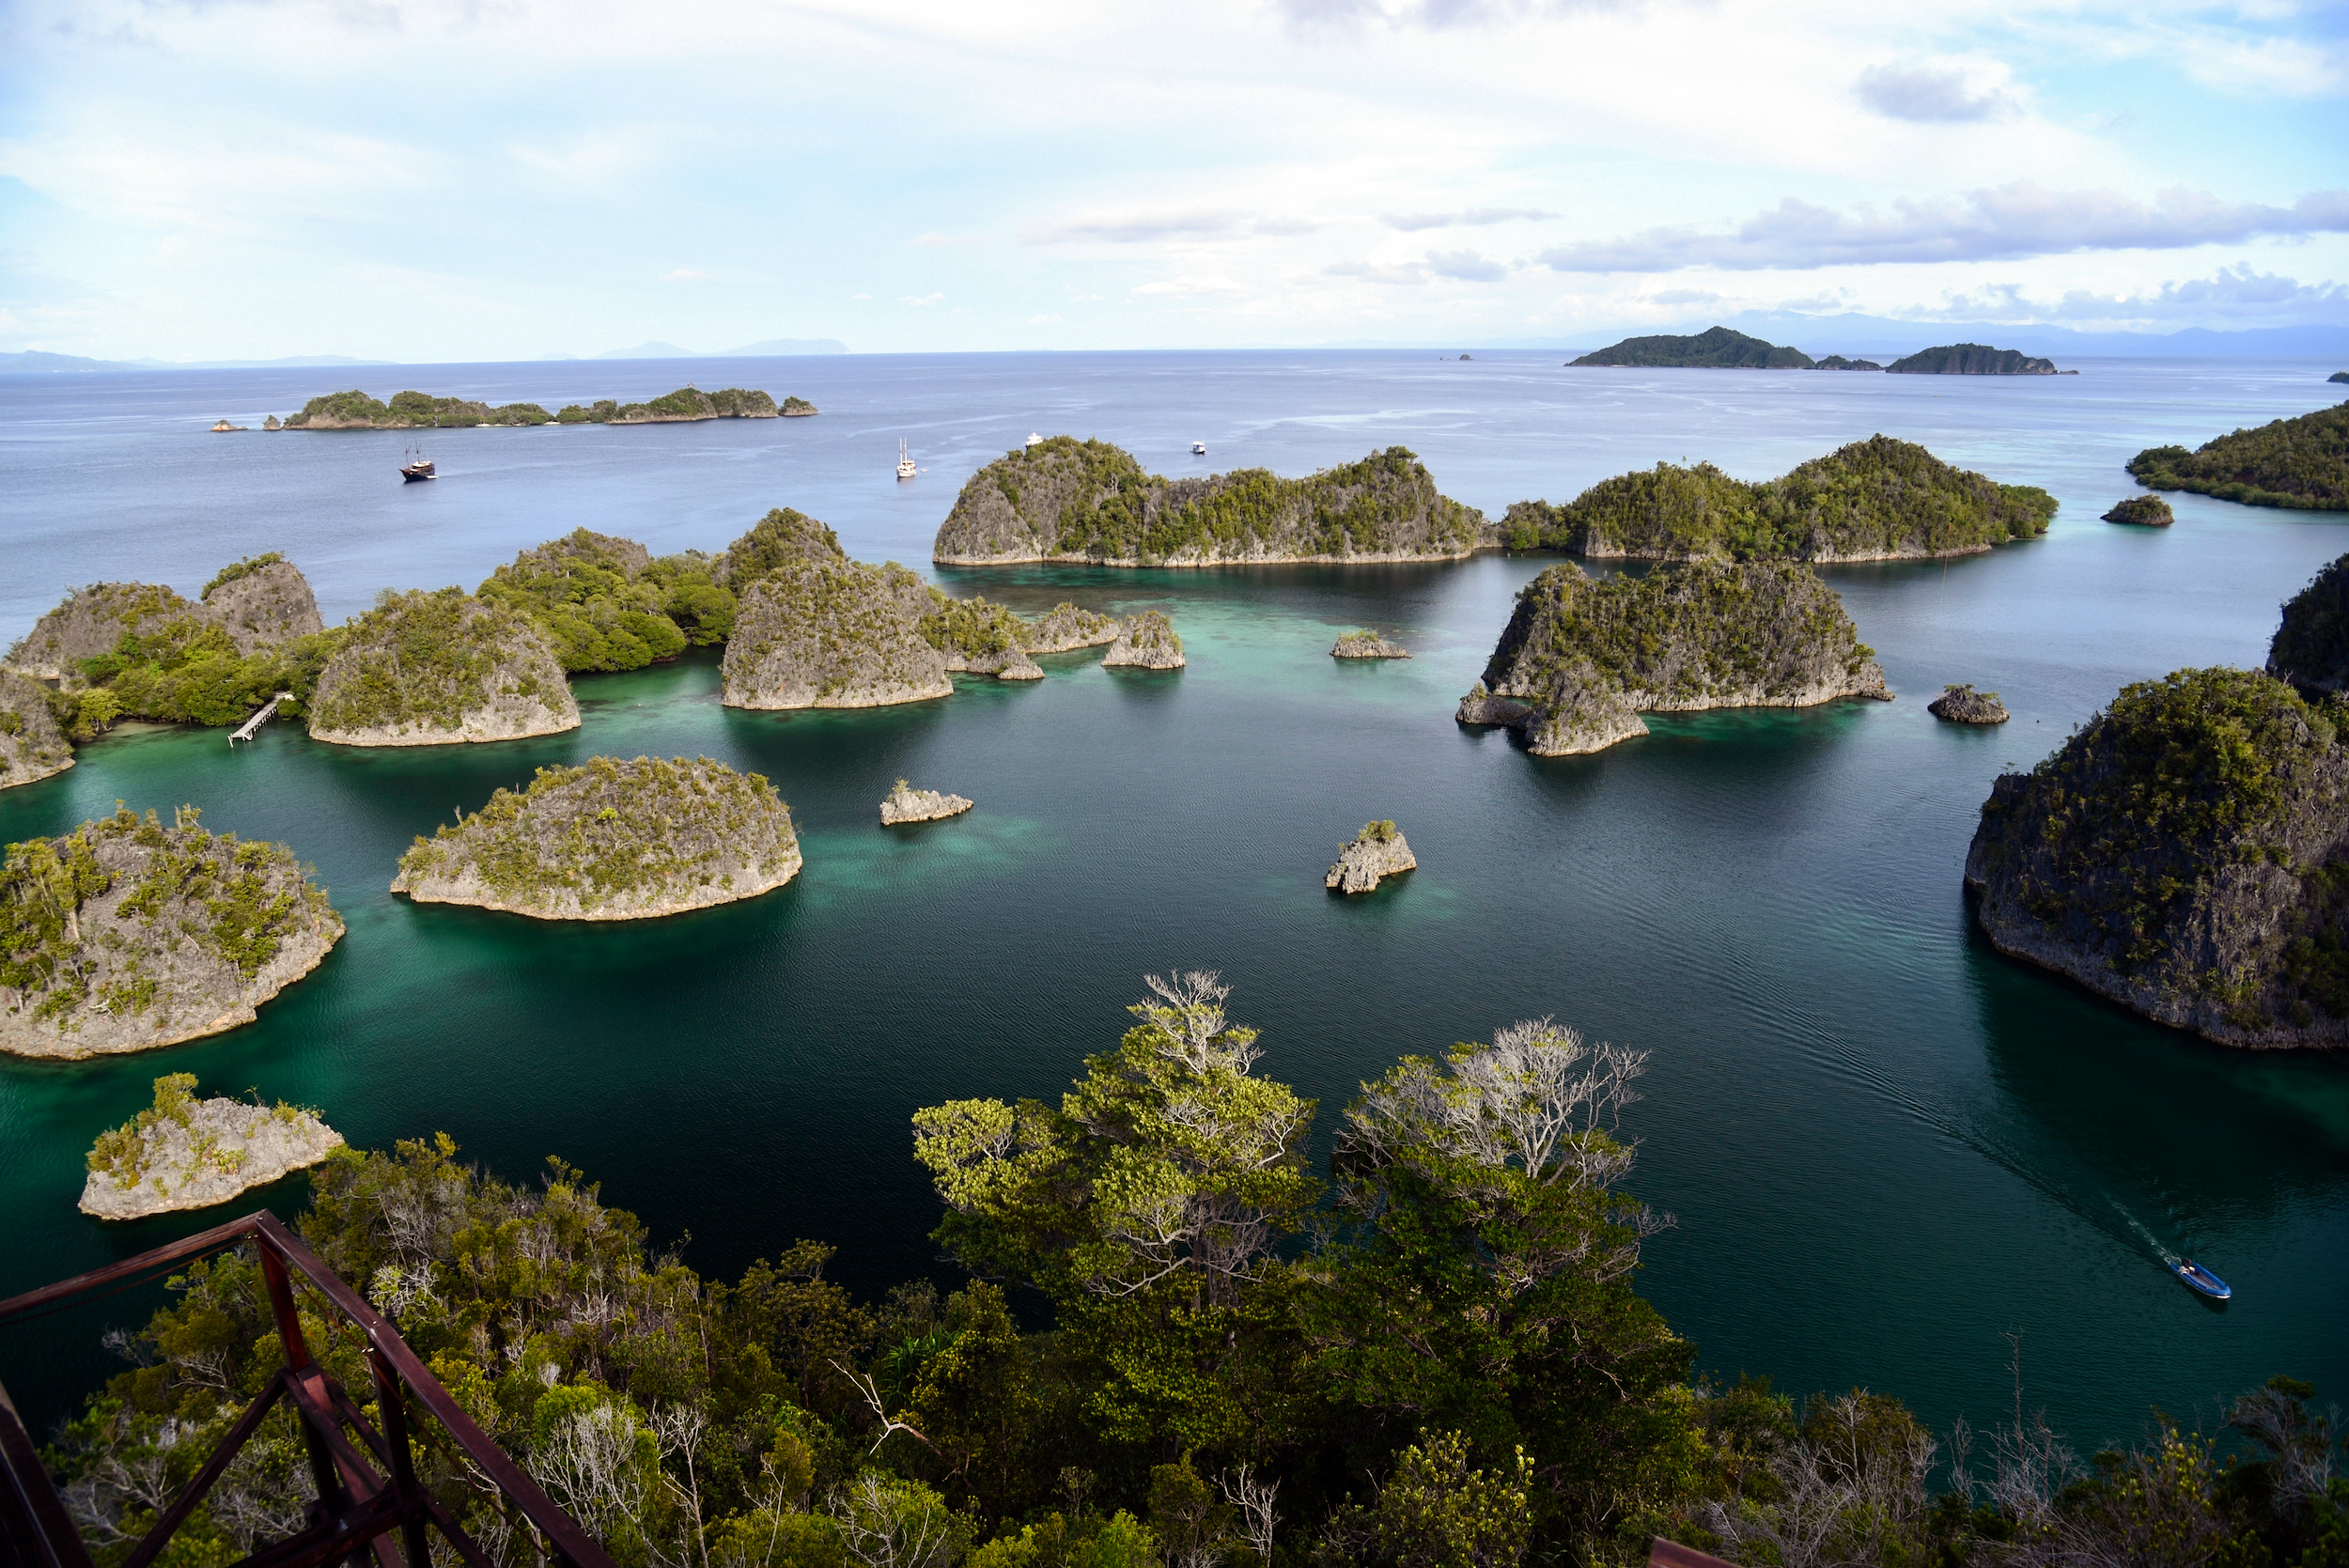 View over Raja Ampat from Piaynemo viewpoint. Photo by Pierre Constant